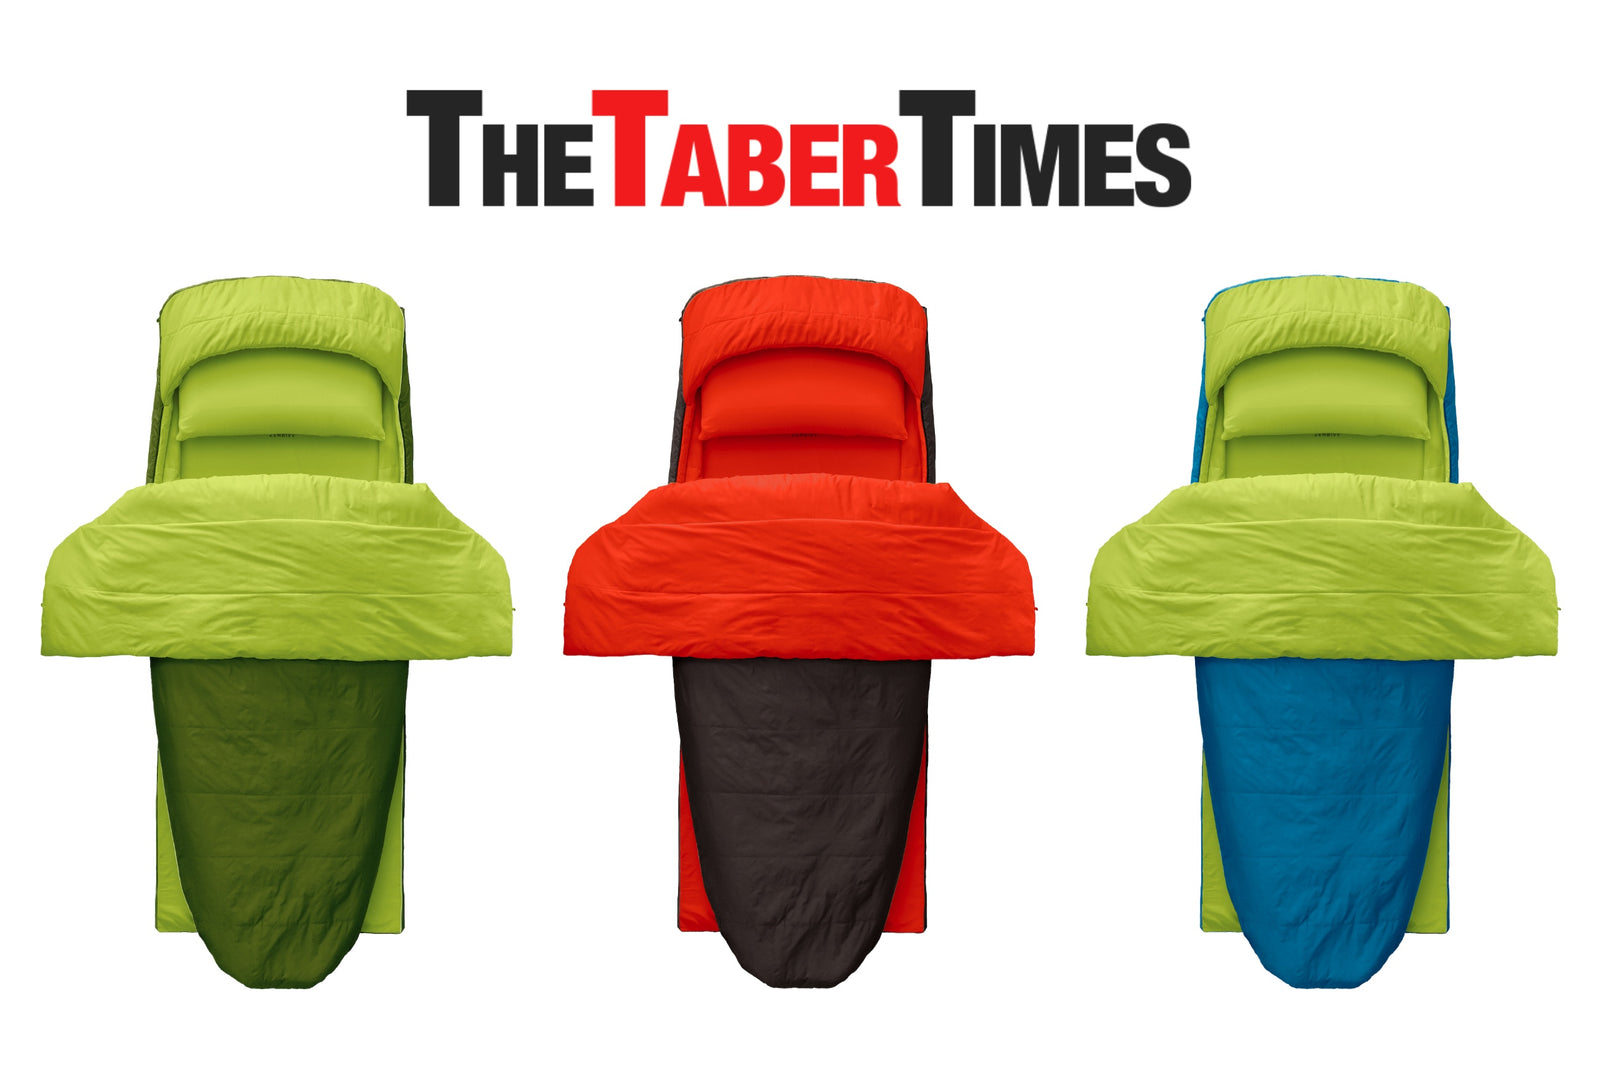 PRESS: The Taber Times reviews the MotoBed™